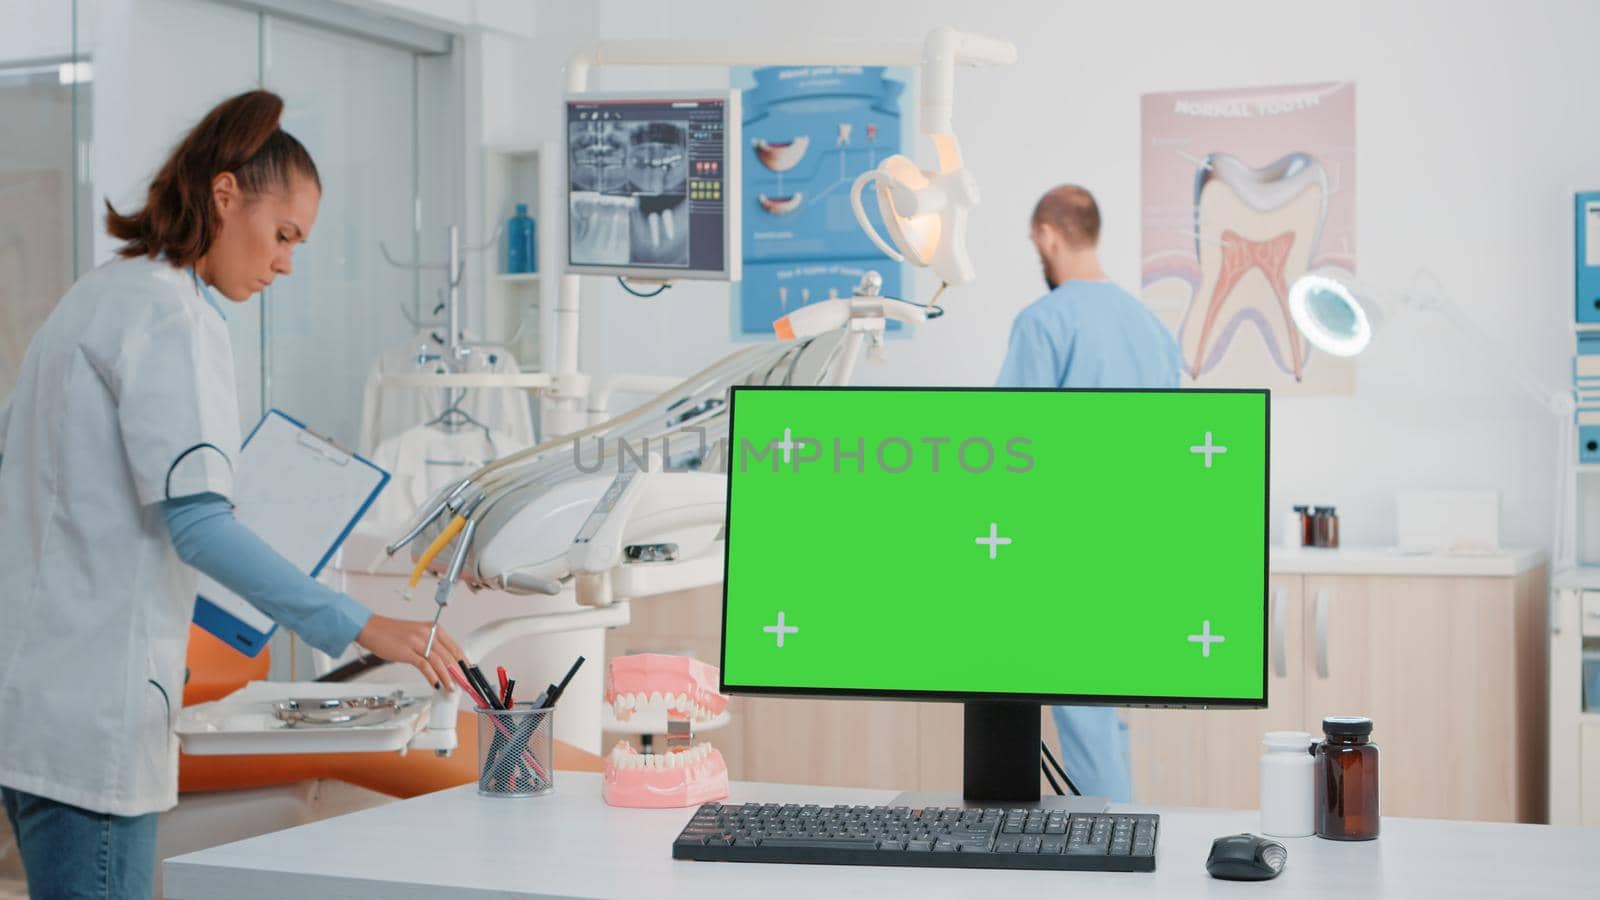 Horizontal green screen on computer in dental cabinet while dentist and assistant using oral care equipment for stomatological examination. Monitor with chroma key and isolated mockup template